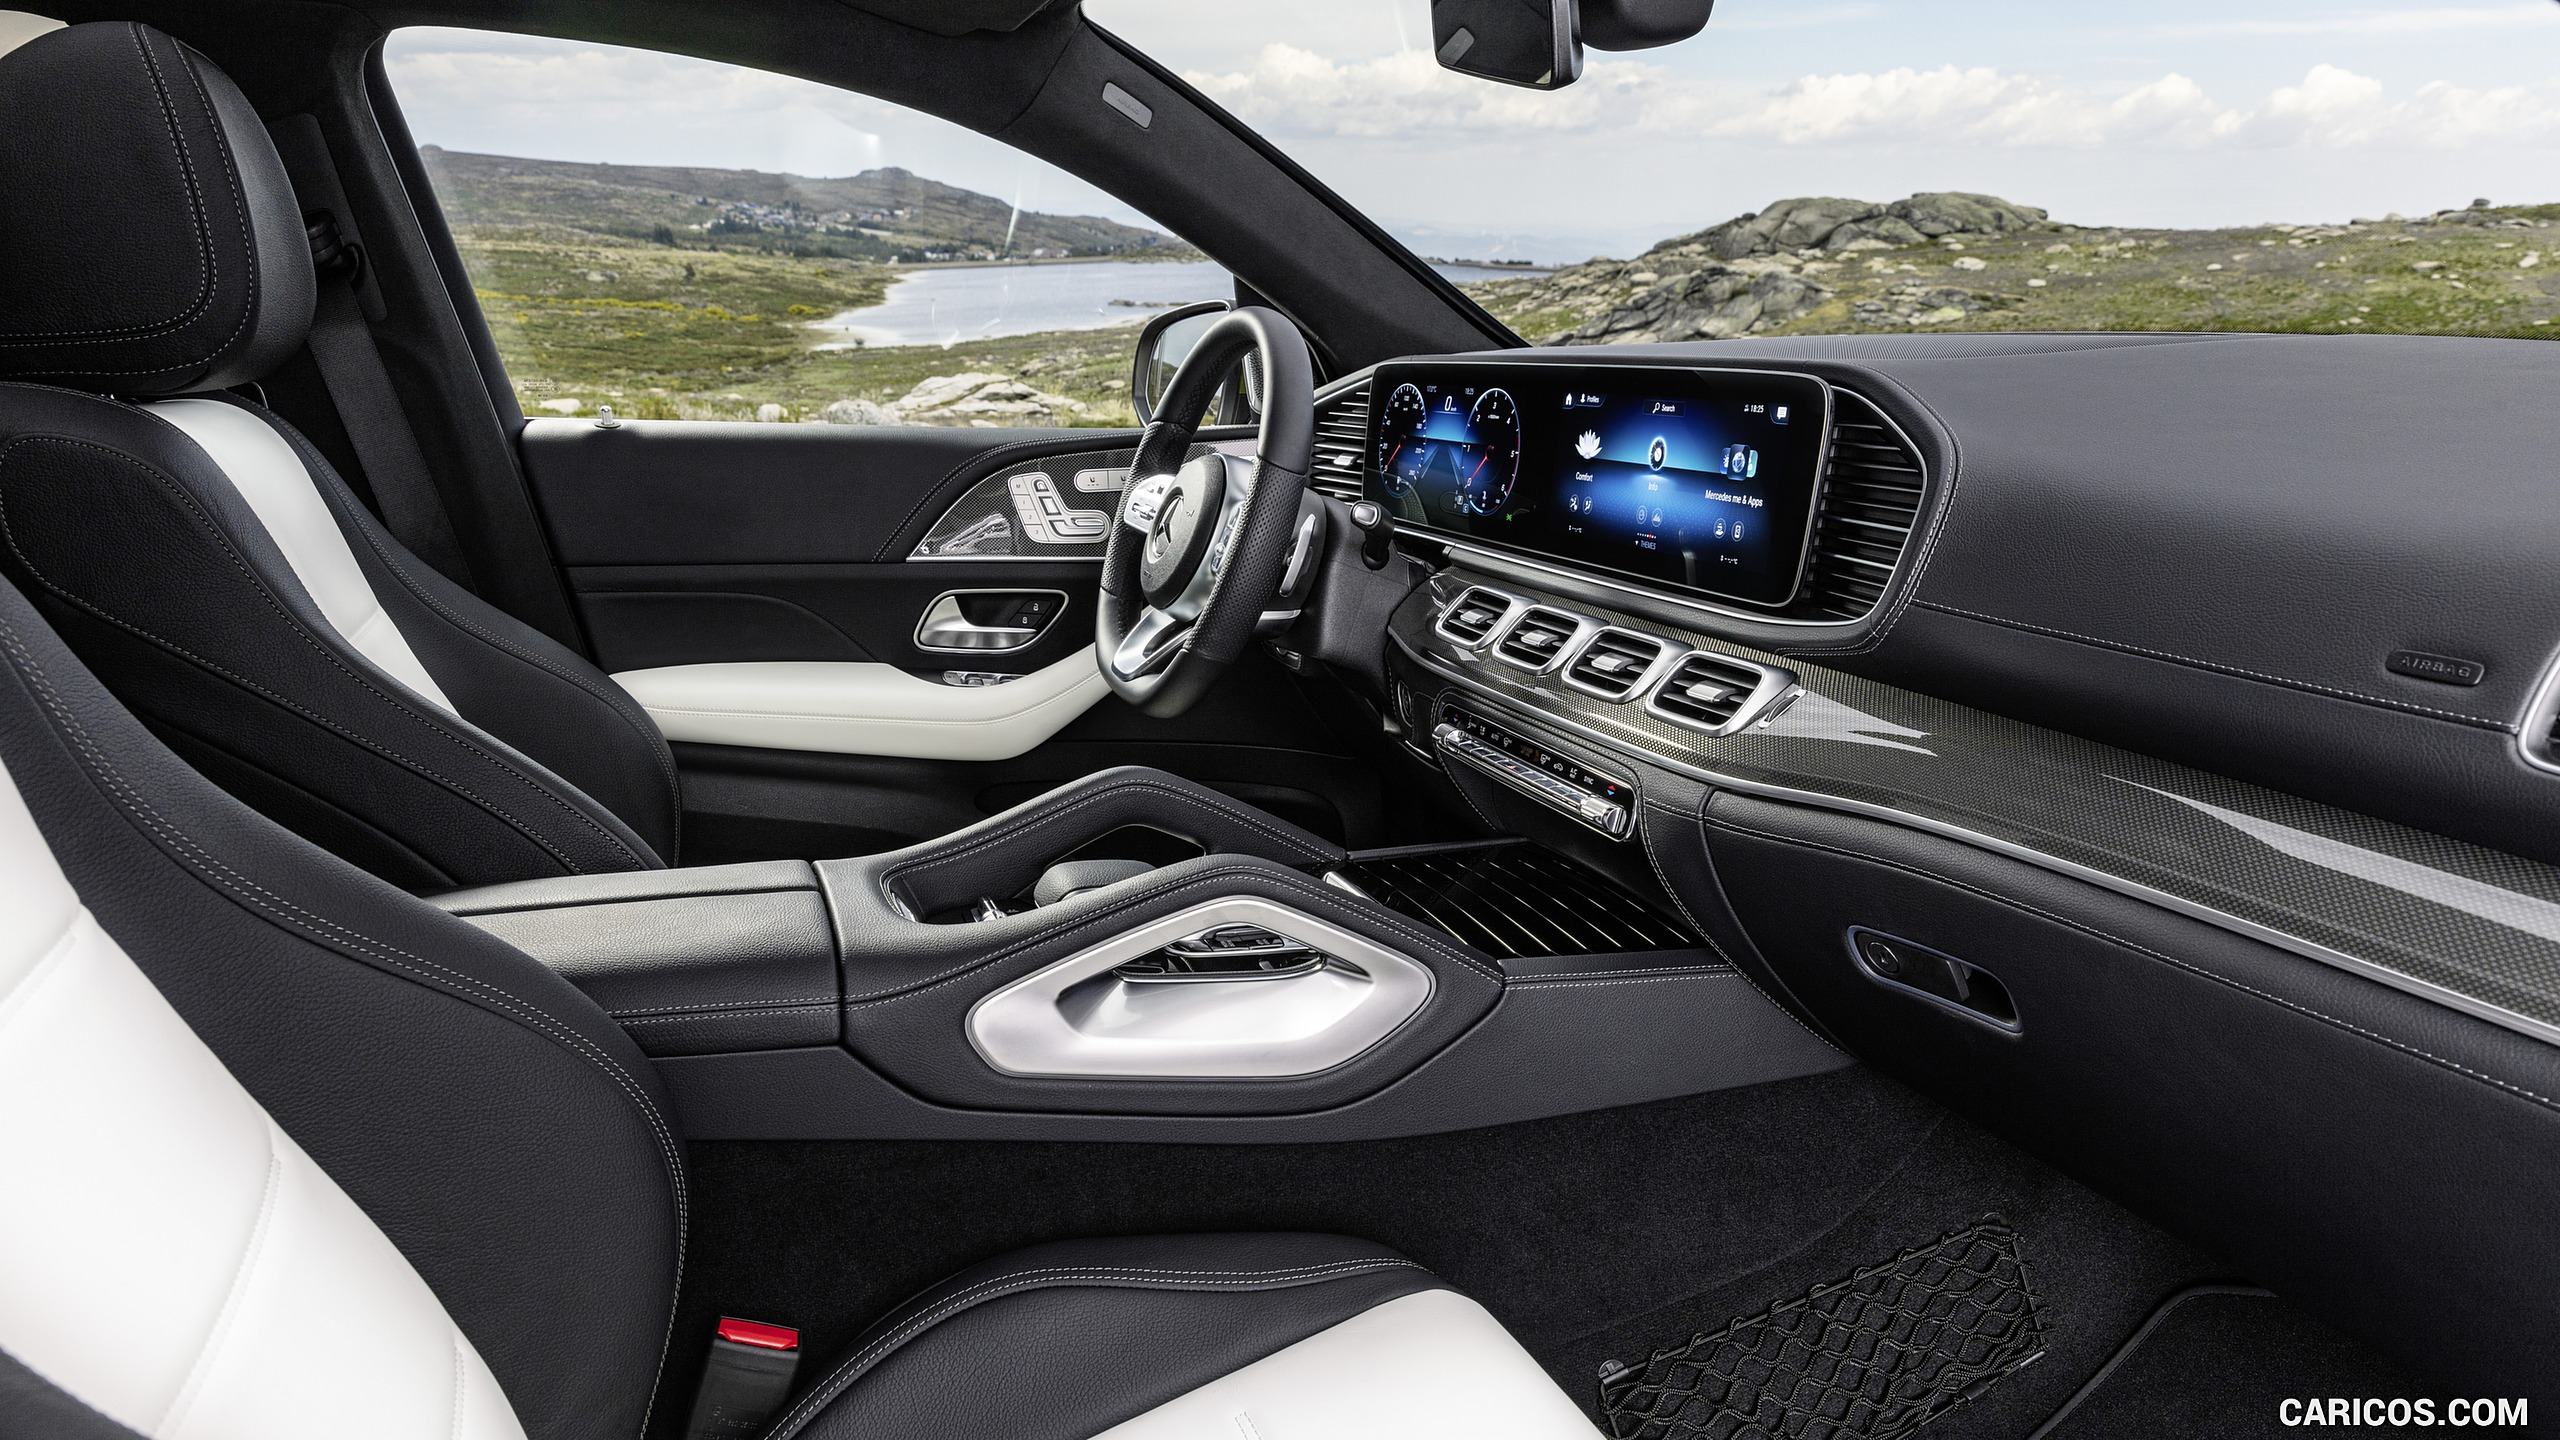 2021 Mercedes-Benz GLE Coupe - Interior, Front Seats, #20 of 62